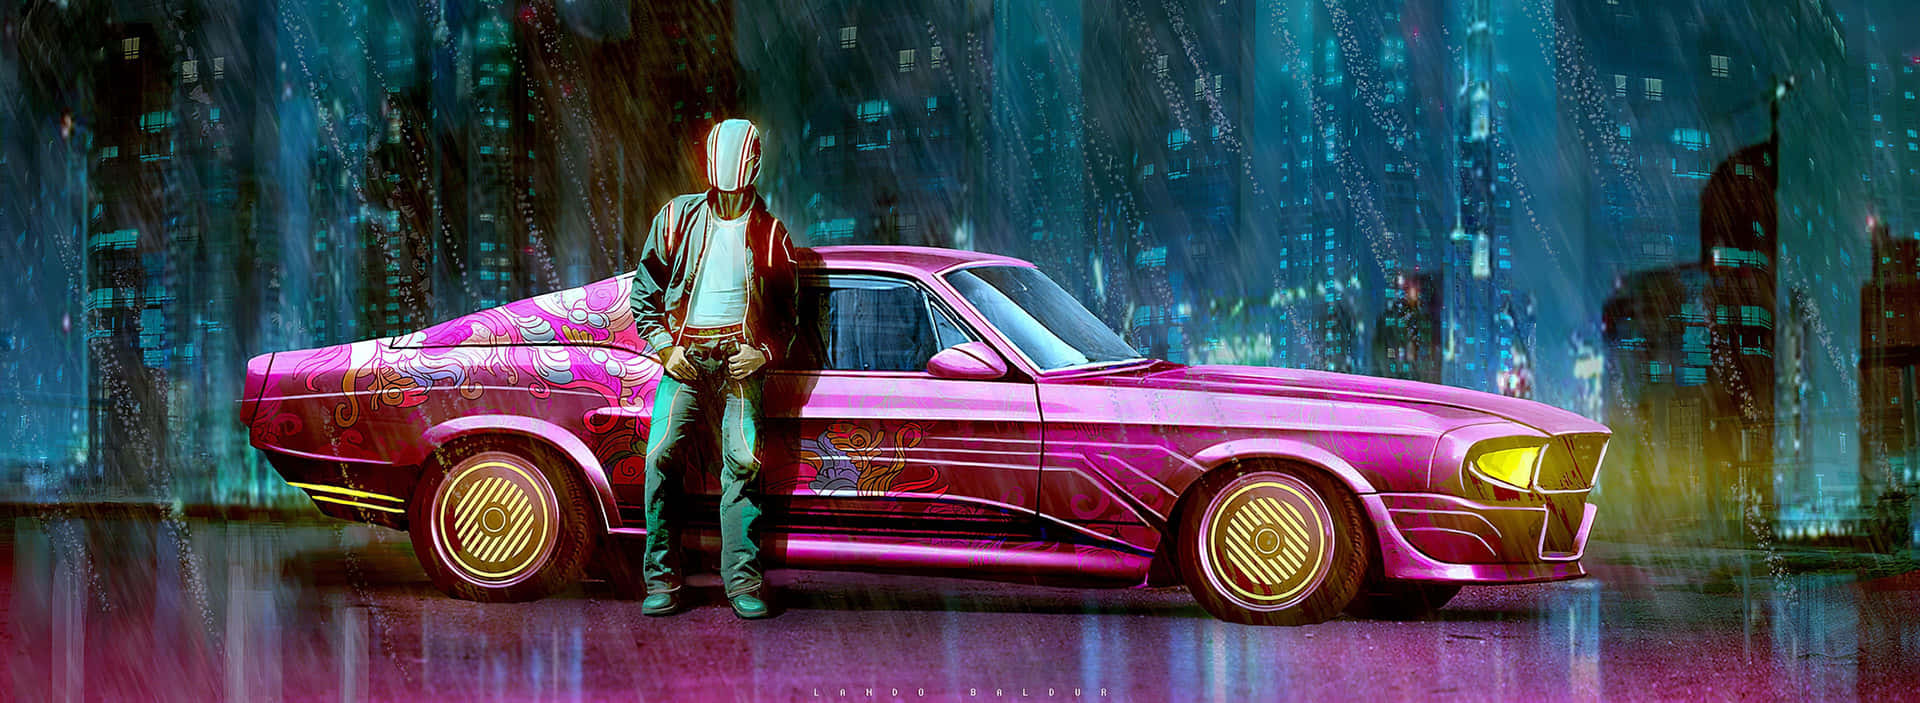 A Pink Car In The Night Wallpaper